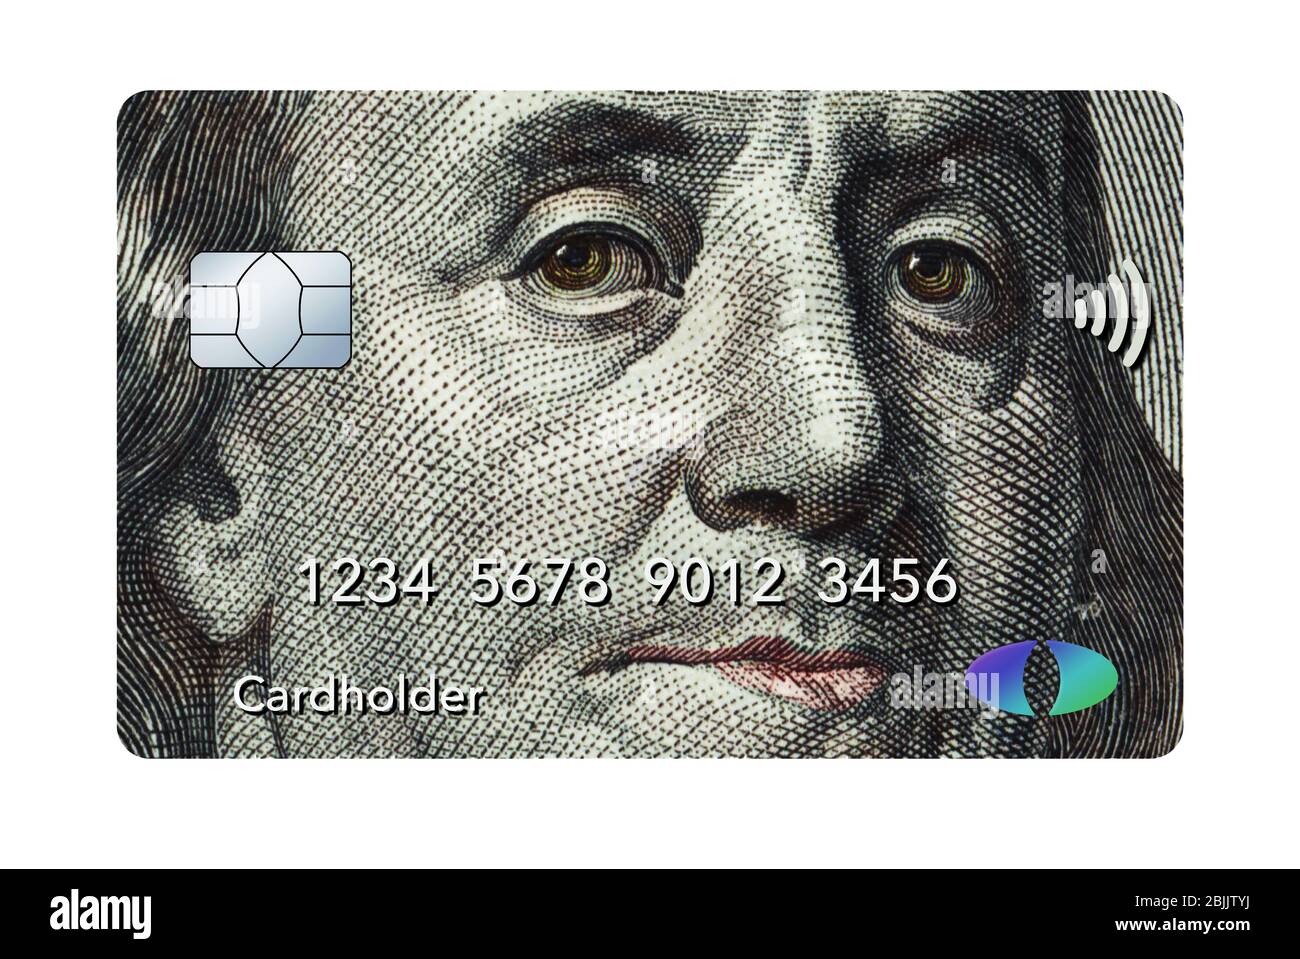 Benjamin Franklin is seen as an image on a credit card or debit card in this illustration about money and finance. Stock Photo